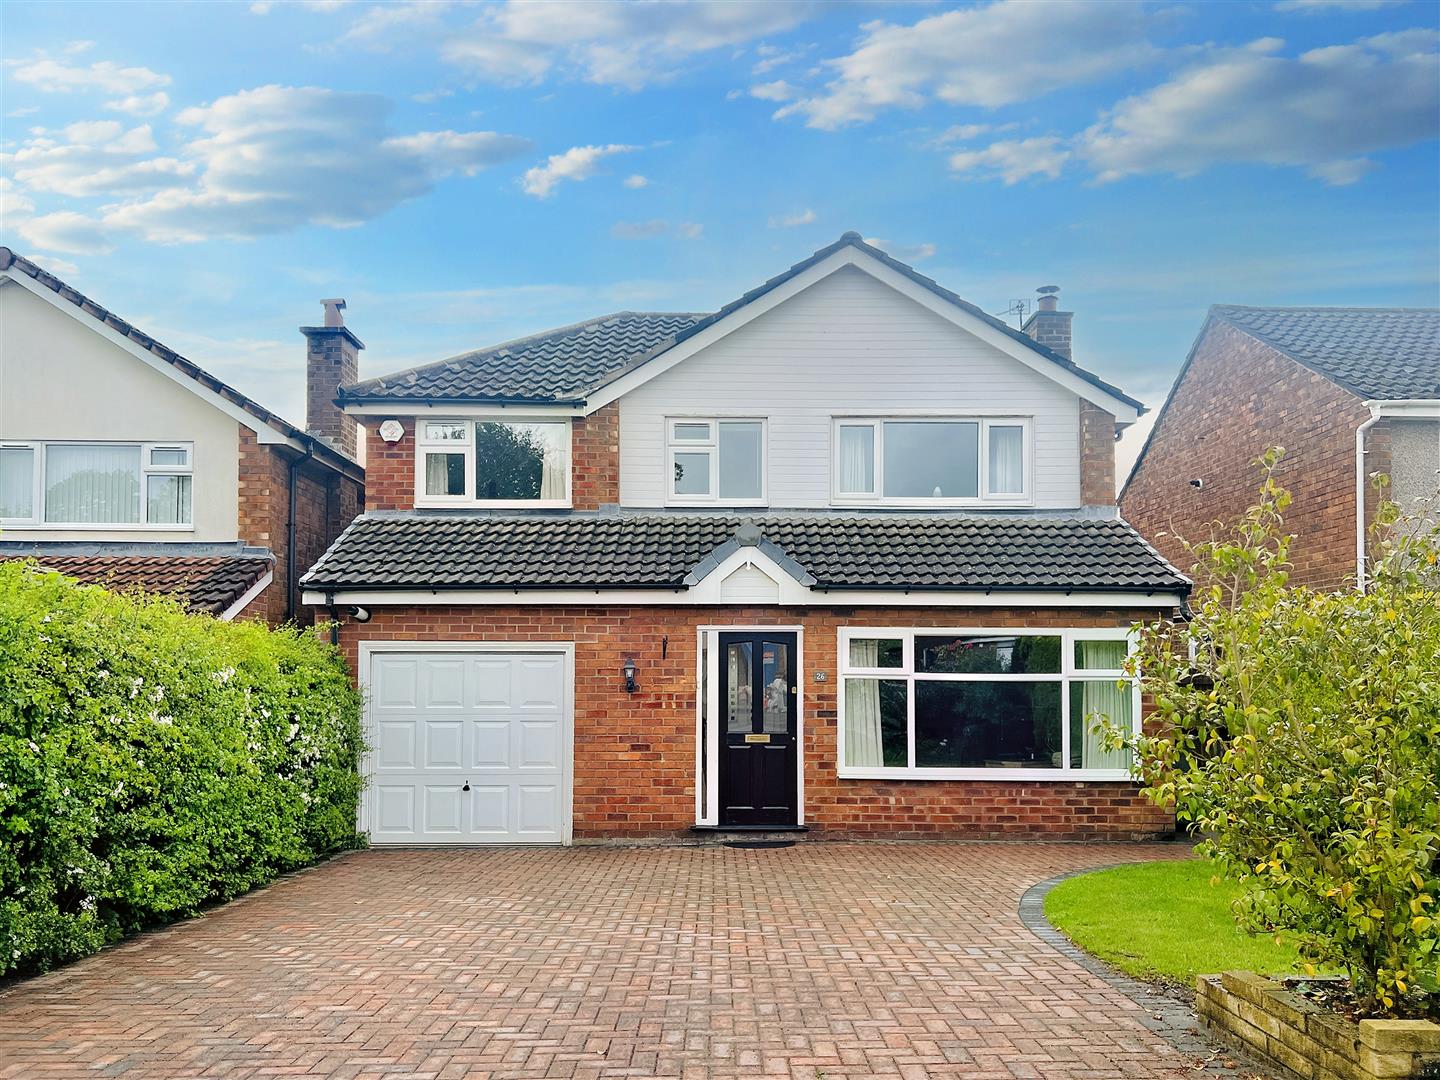 5 bed detached house for sale in Glastonbury Avenue, Altrincham - Property Image 1